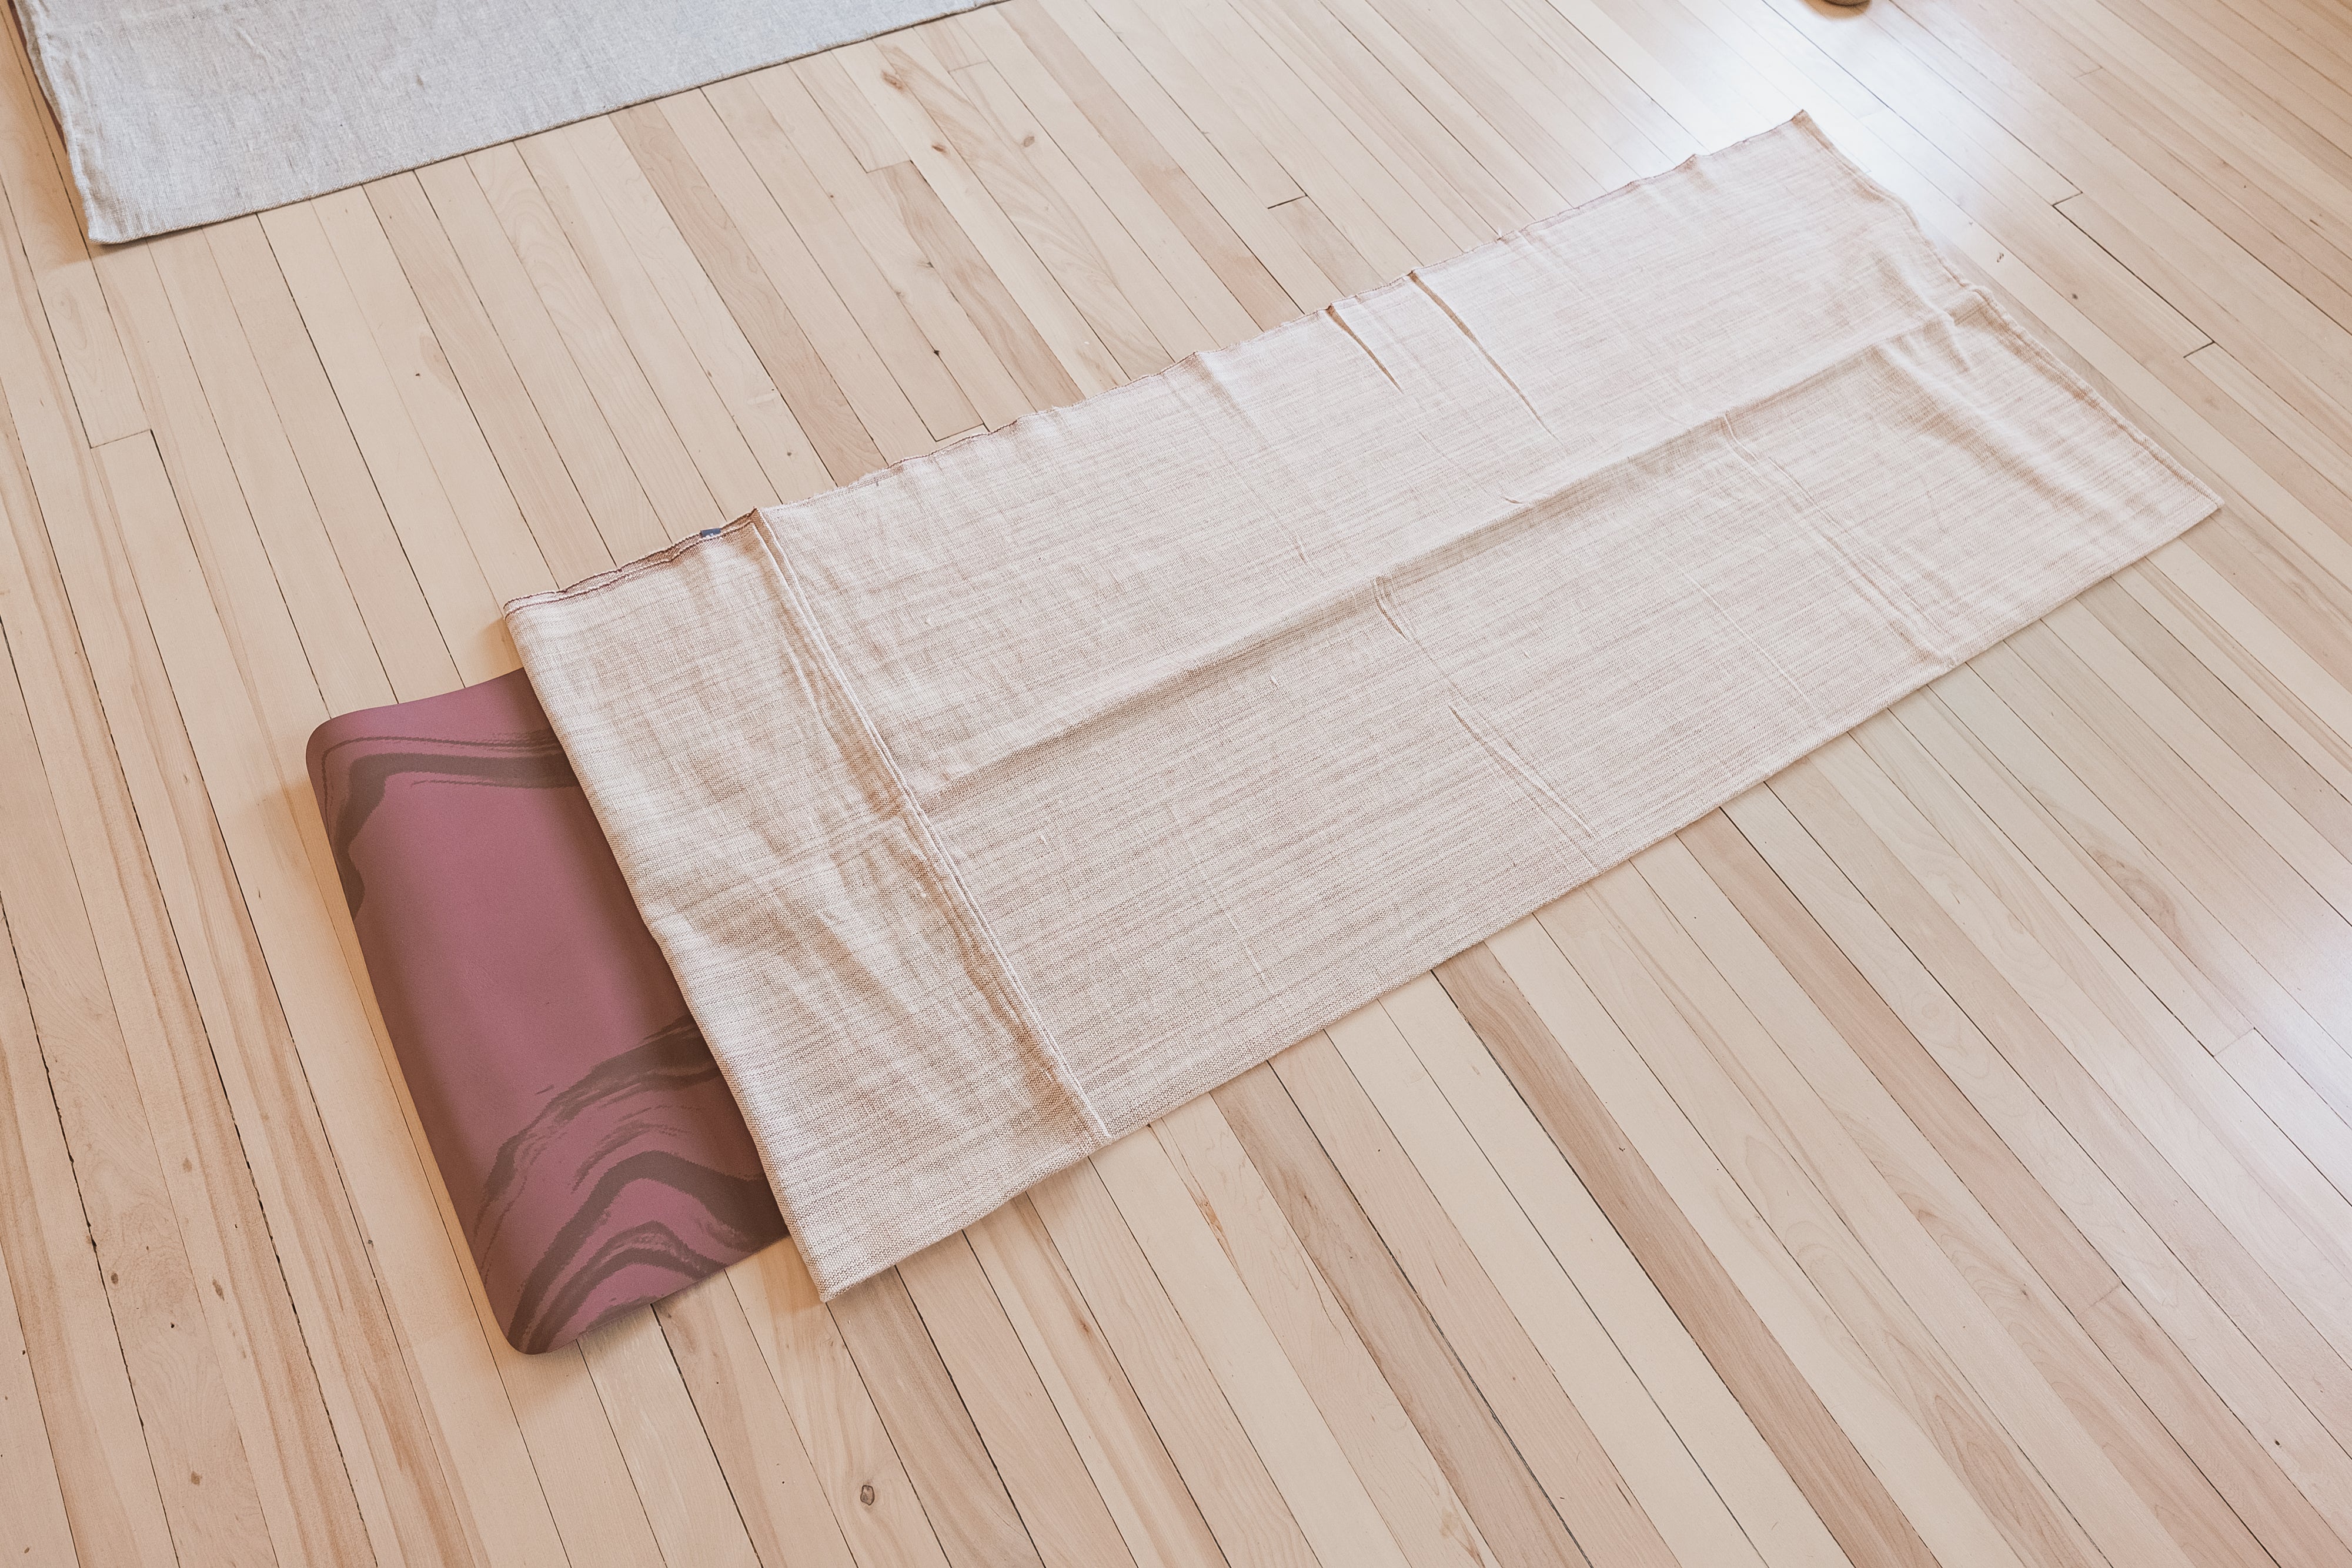 Jade recycled cotton blanket — All Heart Yoga